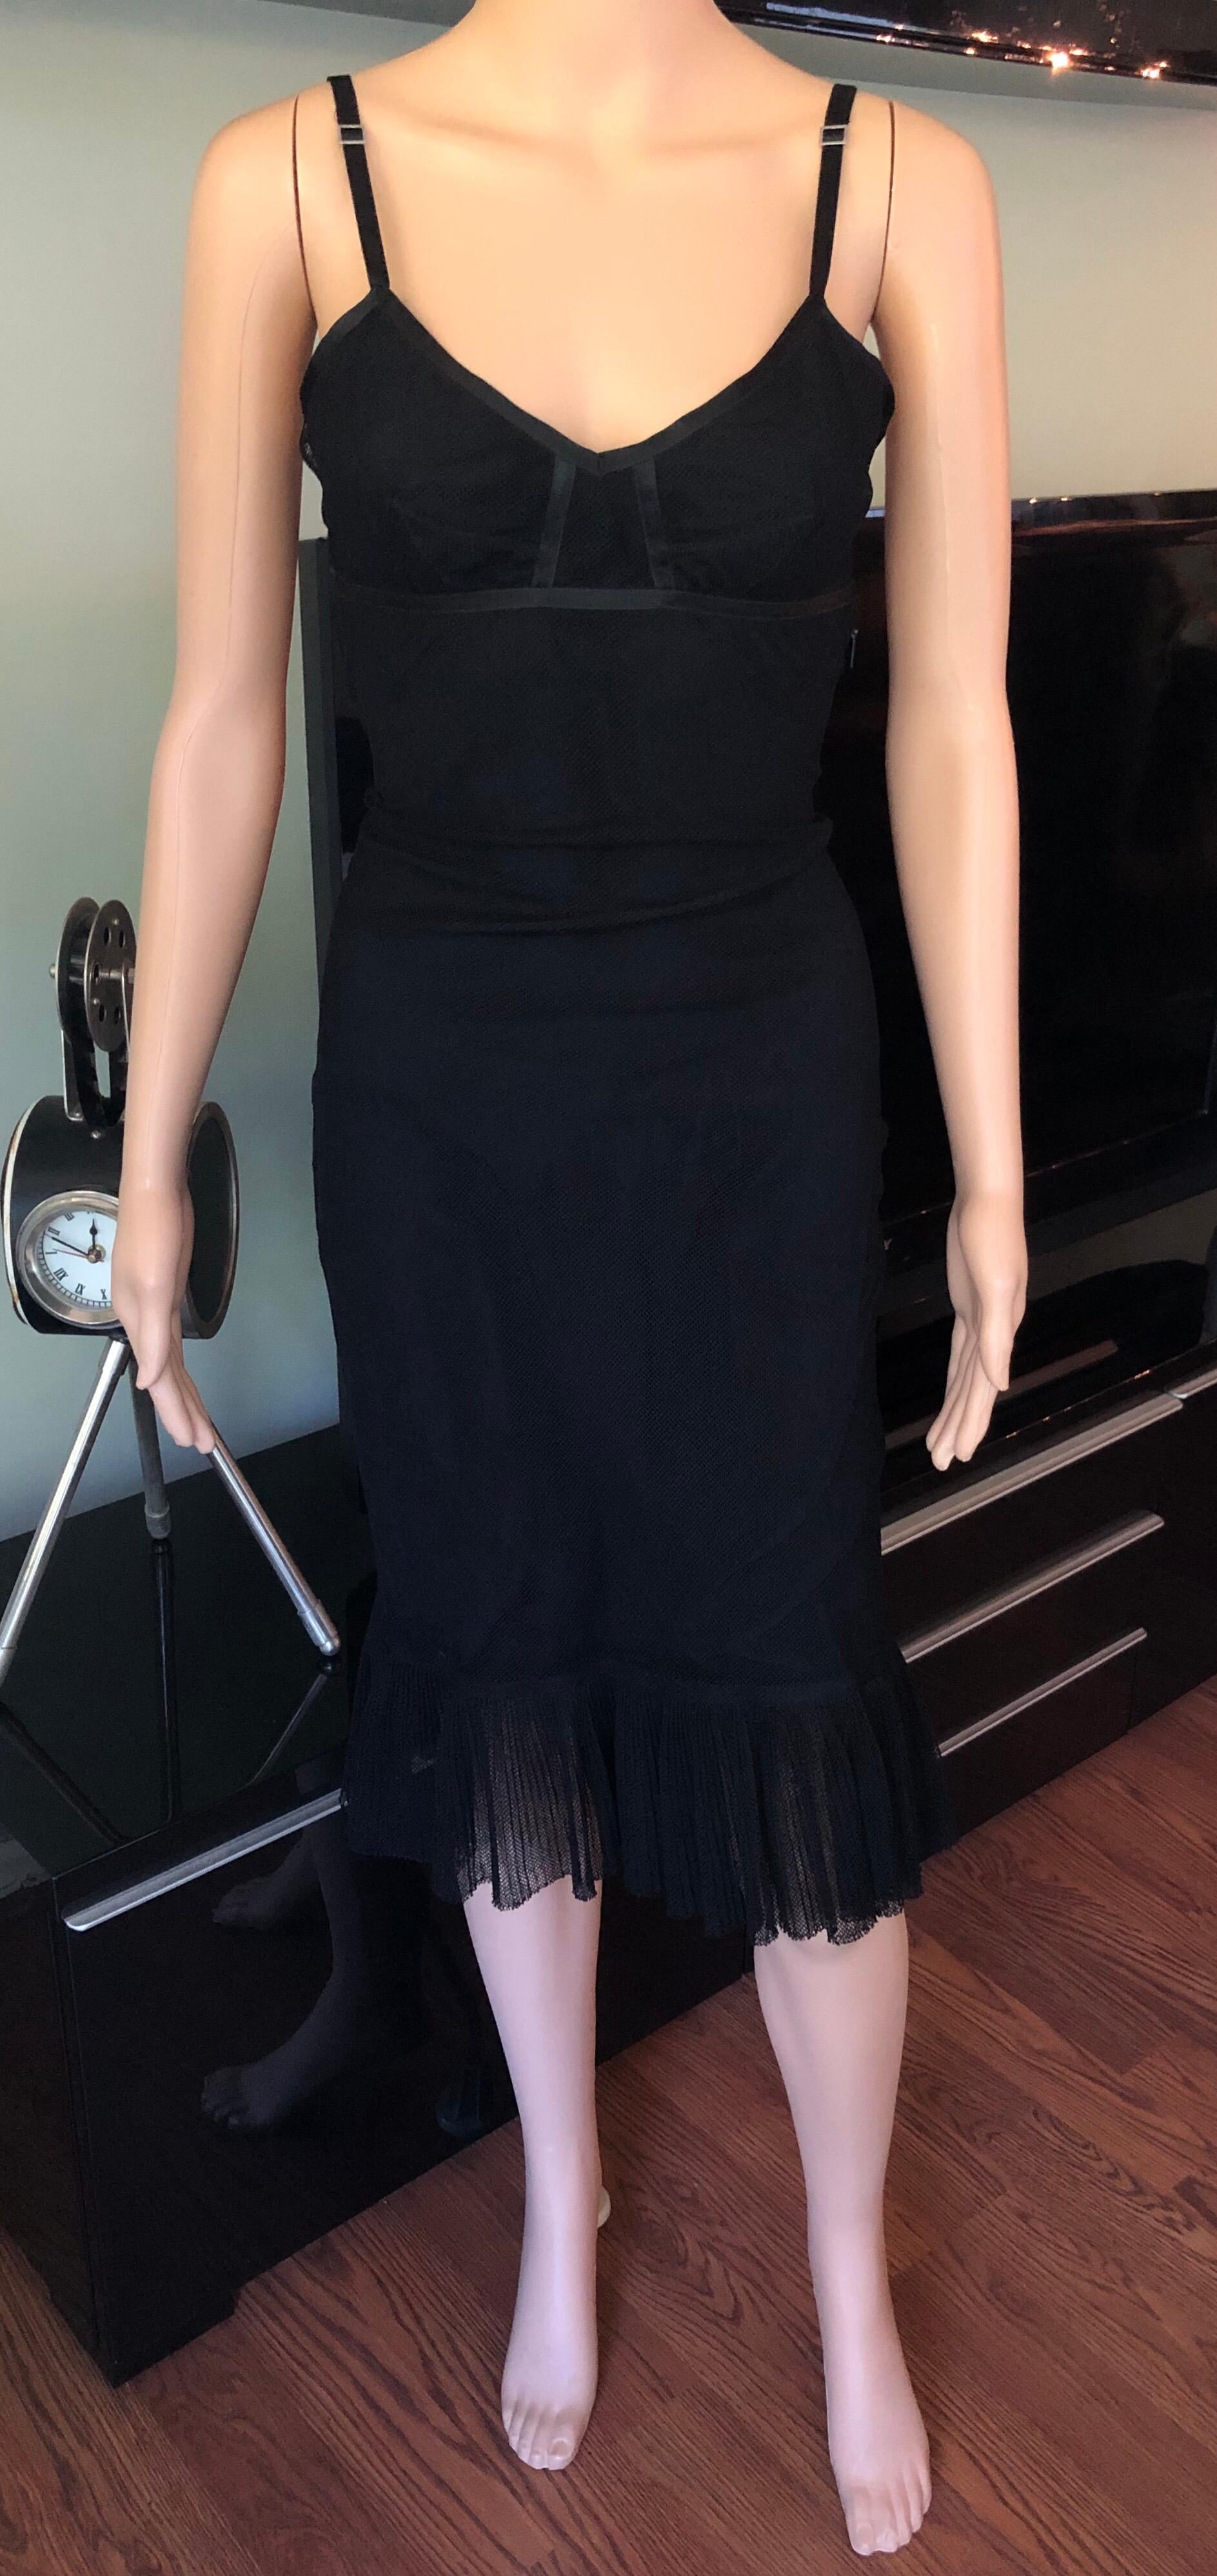 Gucci by Tom Ford F/W 2001 Cutout Back Mesh Black Dress In Good Condition For Sale In Naples, FL